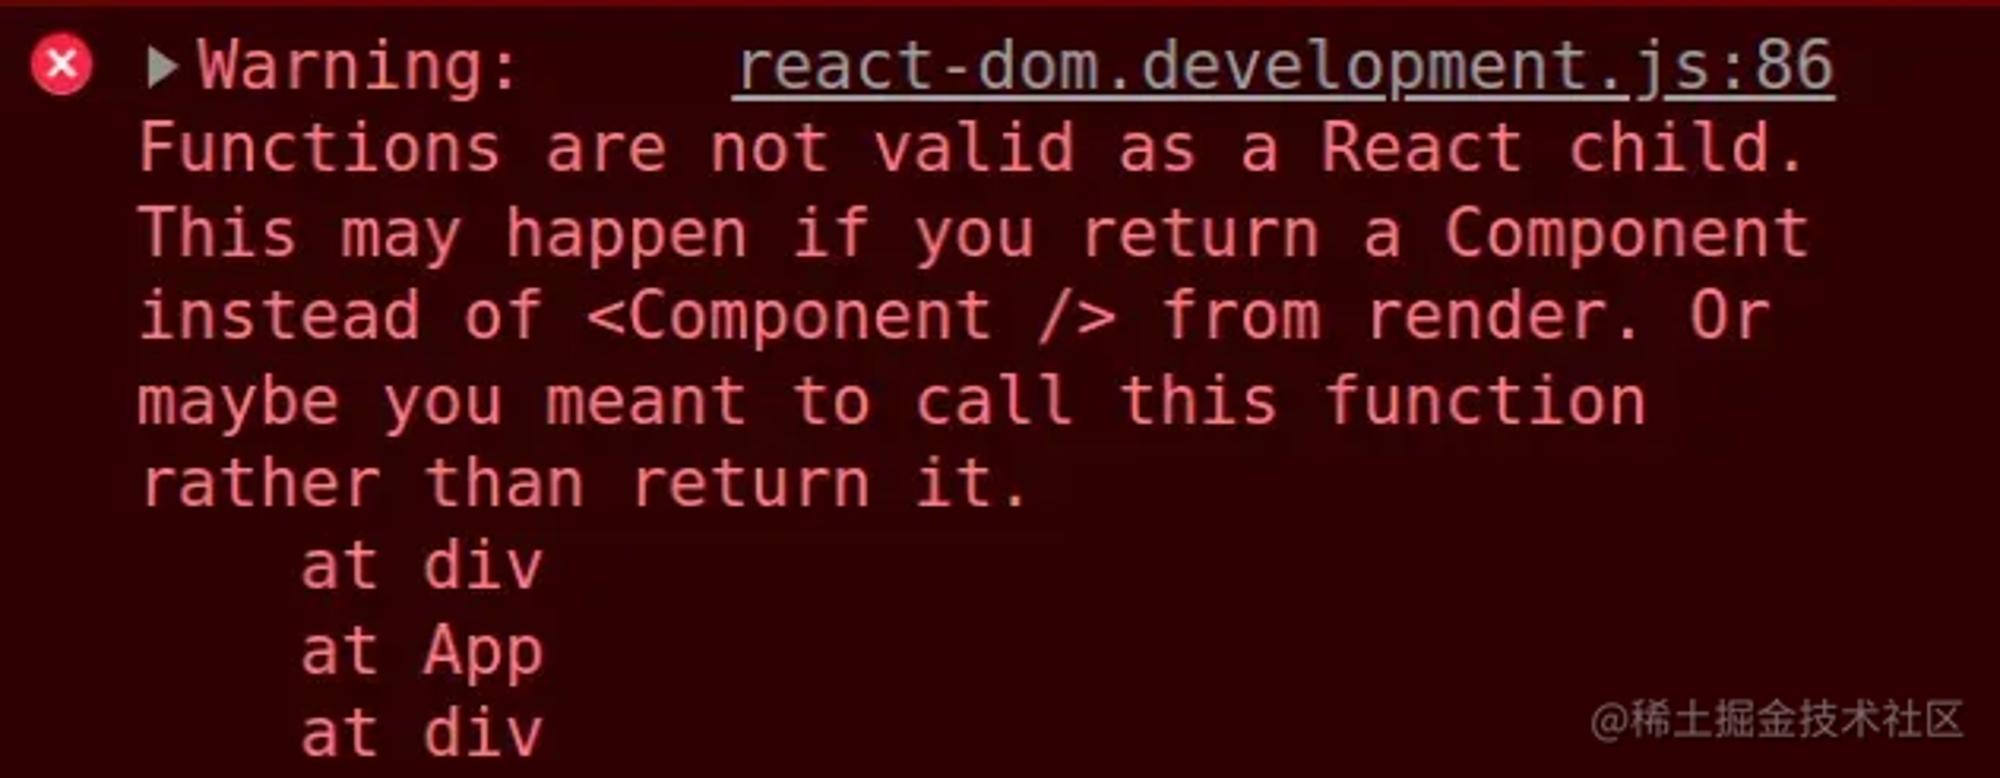 functions-are-not-valid-as-react-child.png